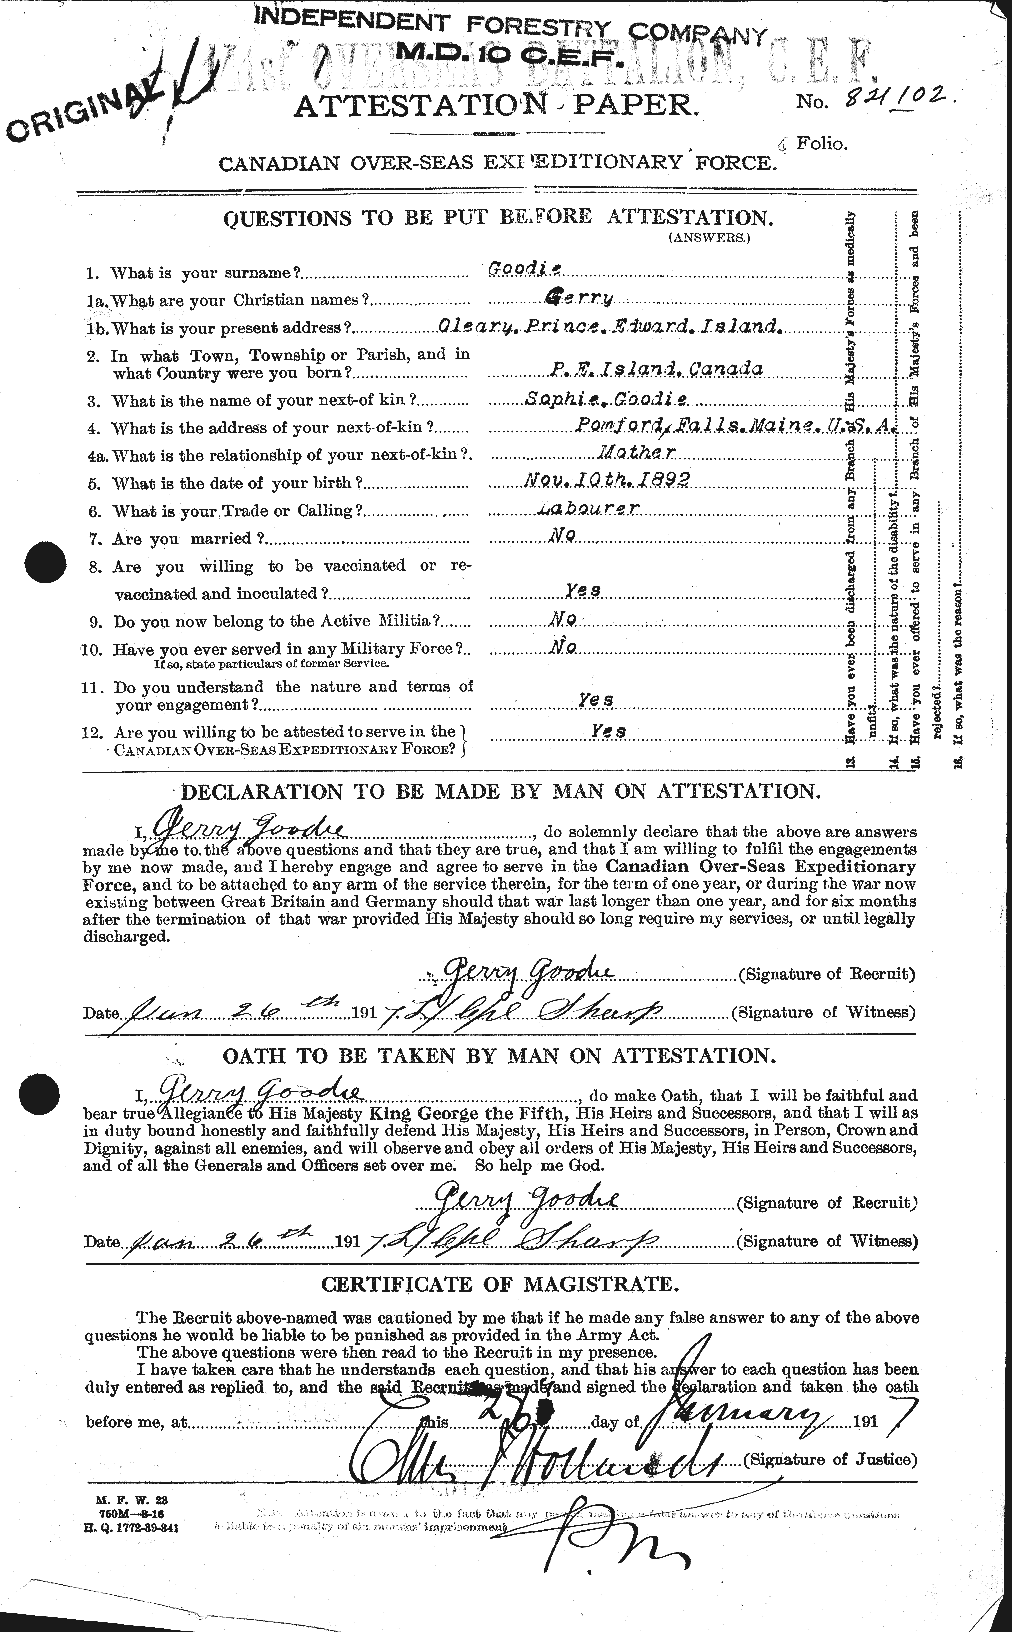 Personnel Records of the First World War - CEF 354690a